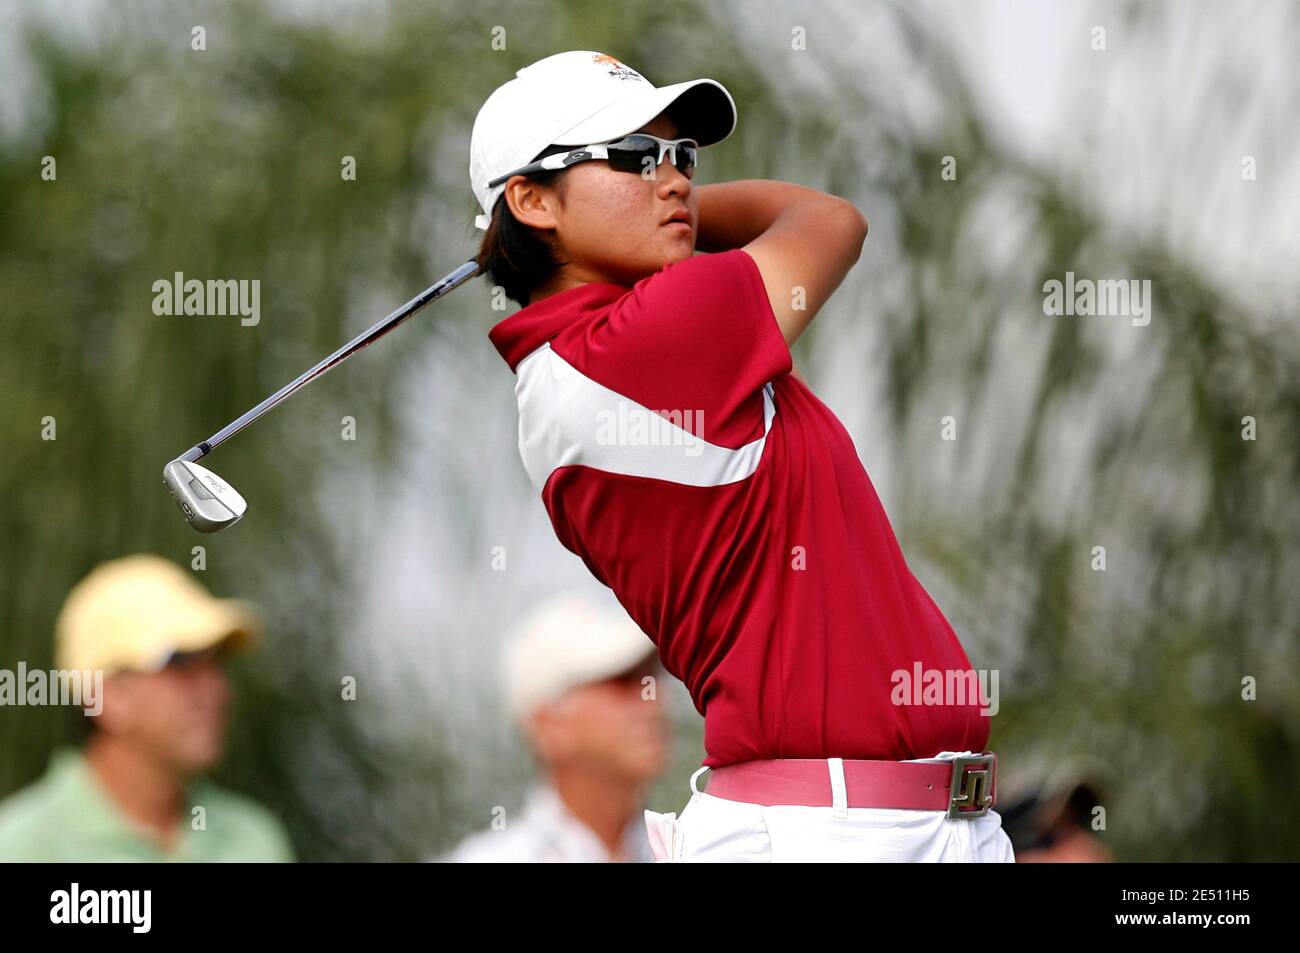 Yani Tseng on the second tee during final round action of The Ginn Open at Ginn Reunion Resort in Reunion, FL, USA on April 20. 2008. Photo by Romeo Guzman/Cal Sport Media/Cameleon/ABACAPRESS.COM Stock Photo